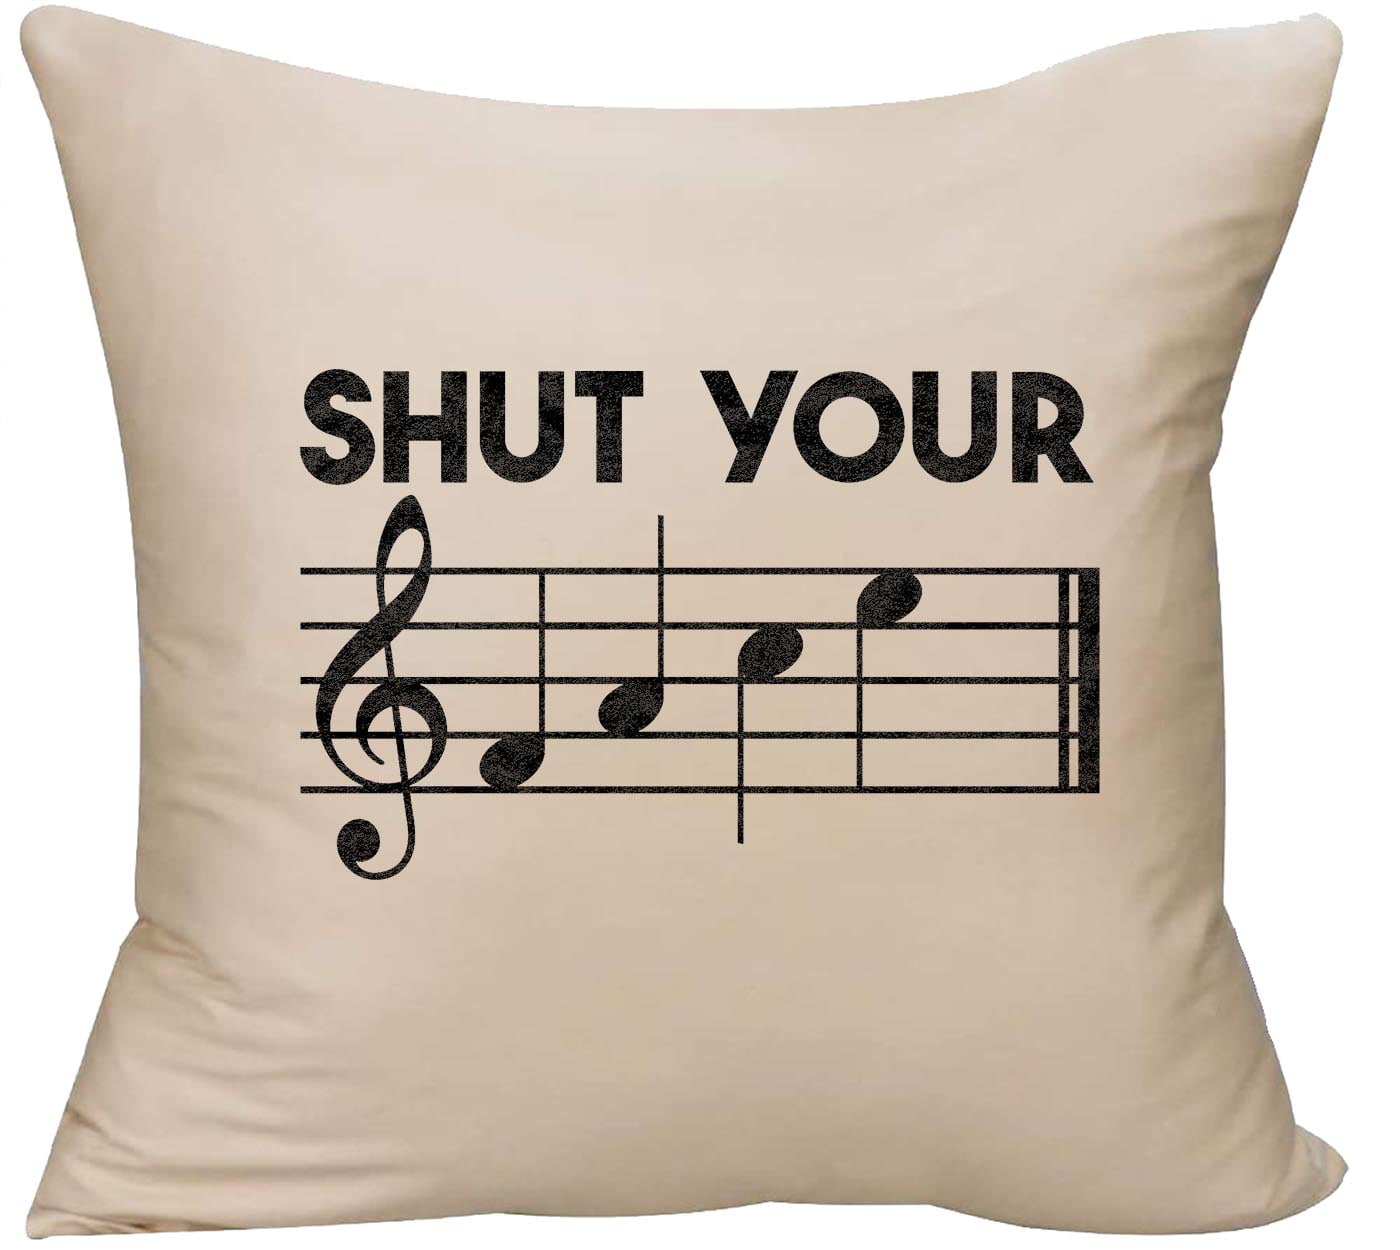 18x18 Multicolor Musical Instrument Treble Clef Music Musician Gift Classical Musical Instrument Musician Treble Clef Throw Pillow